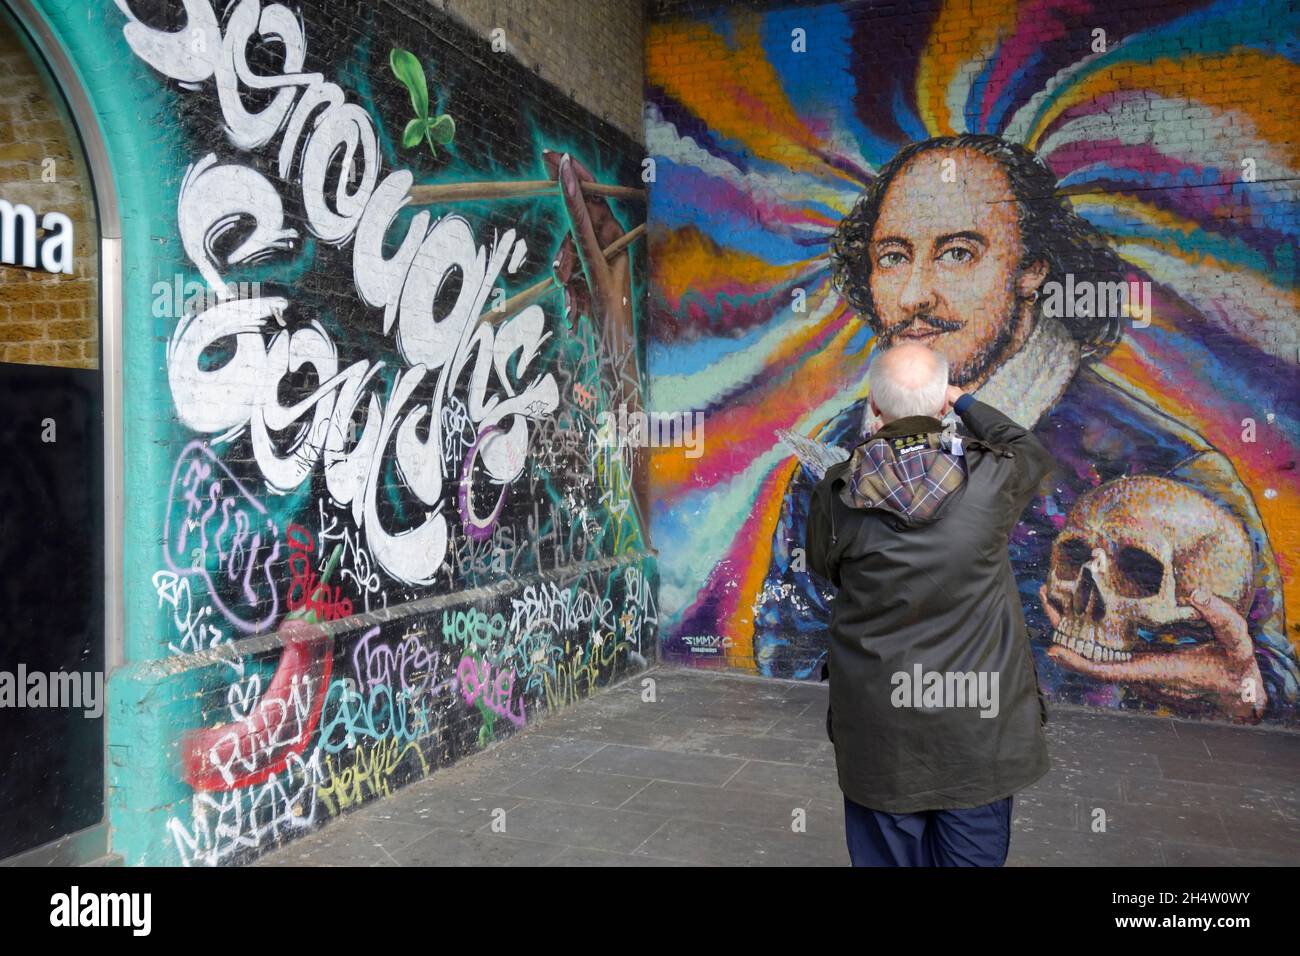 Graffiti Street Art Painting of William Shakespeare in Clink Street London by Jimmy C. Near to Rose and Globe theatres Stock Photo